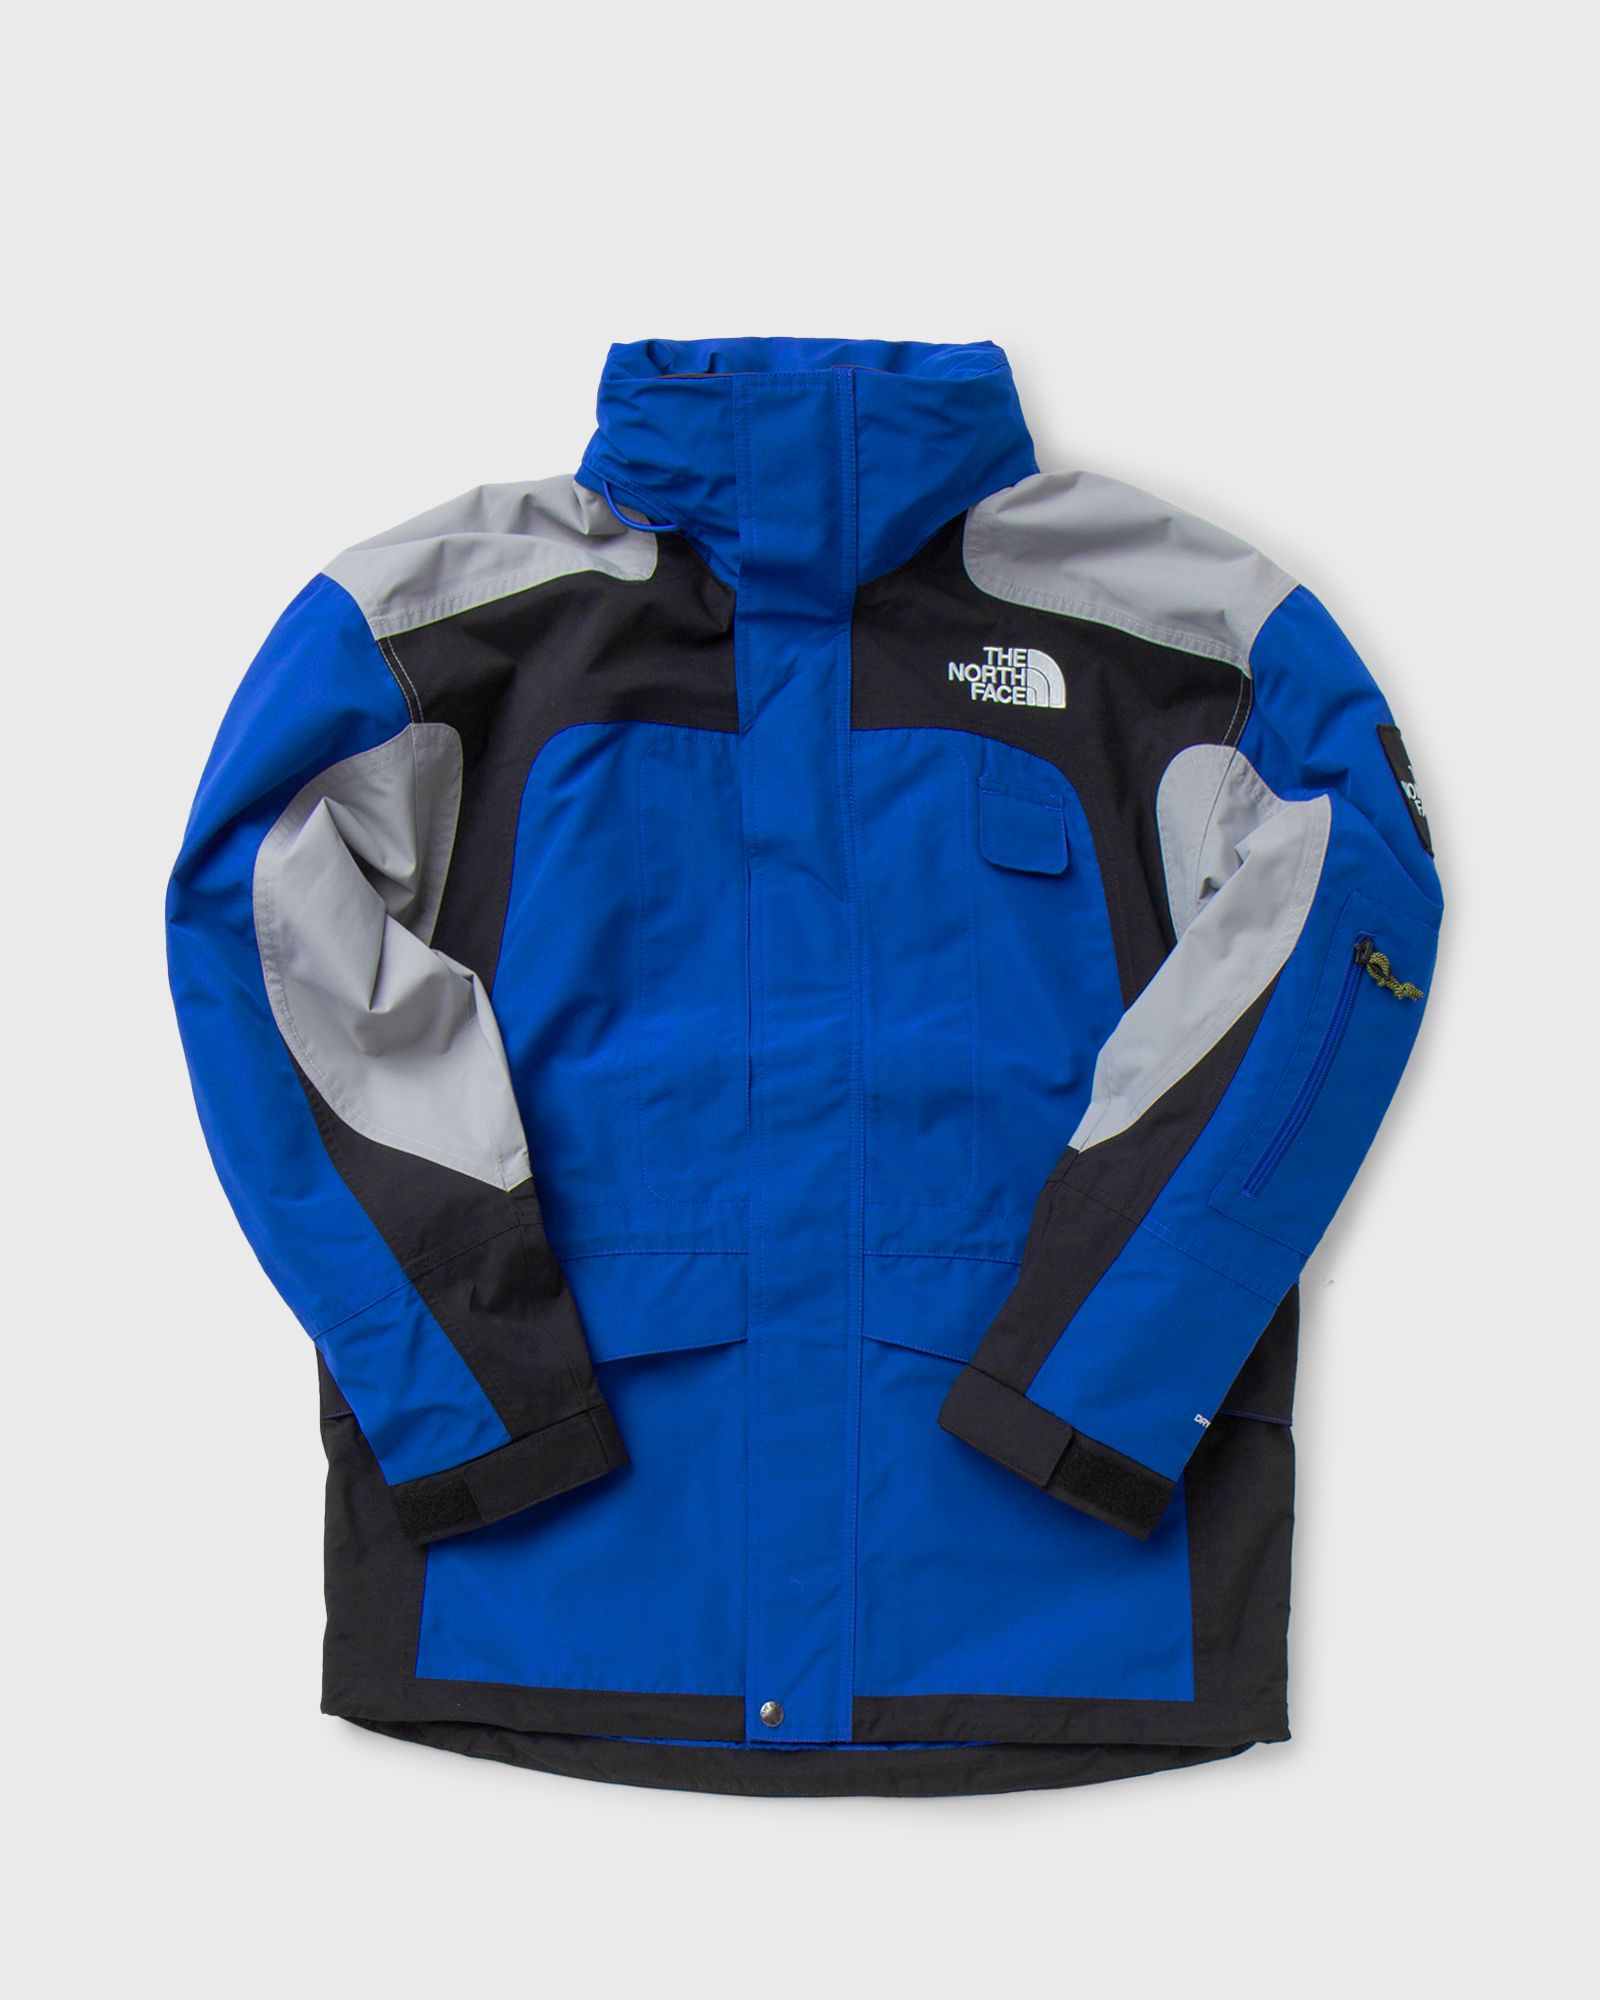 The North Face SEARCH & RESCUE DRYVENT JACKET TNF BLUE men Jackets & Coats now available at BSTN